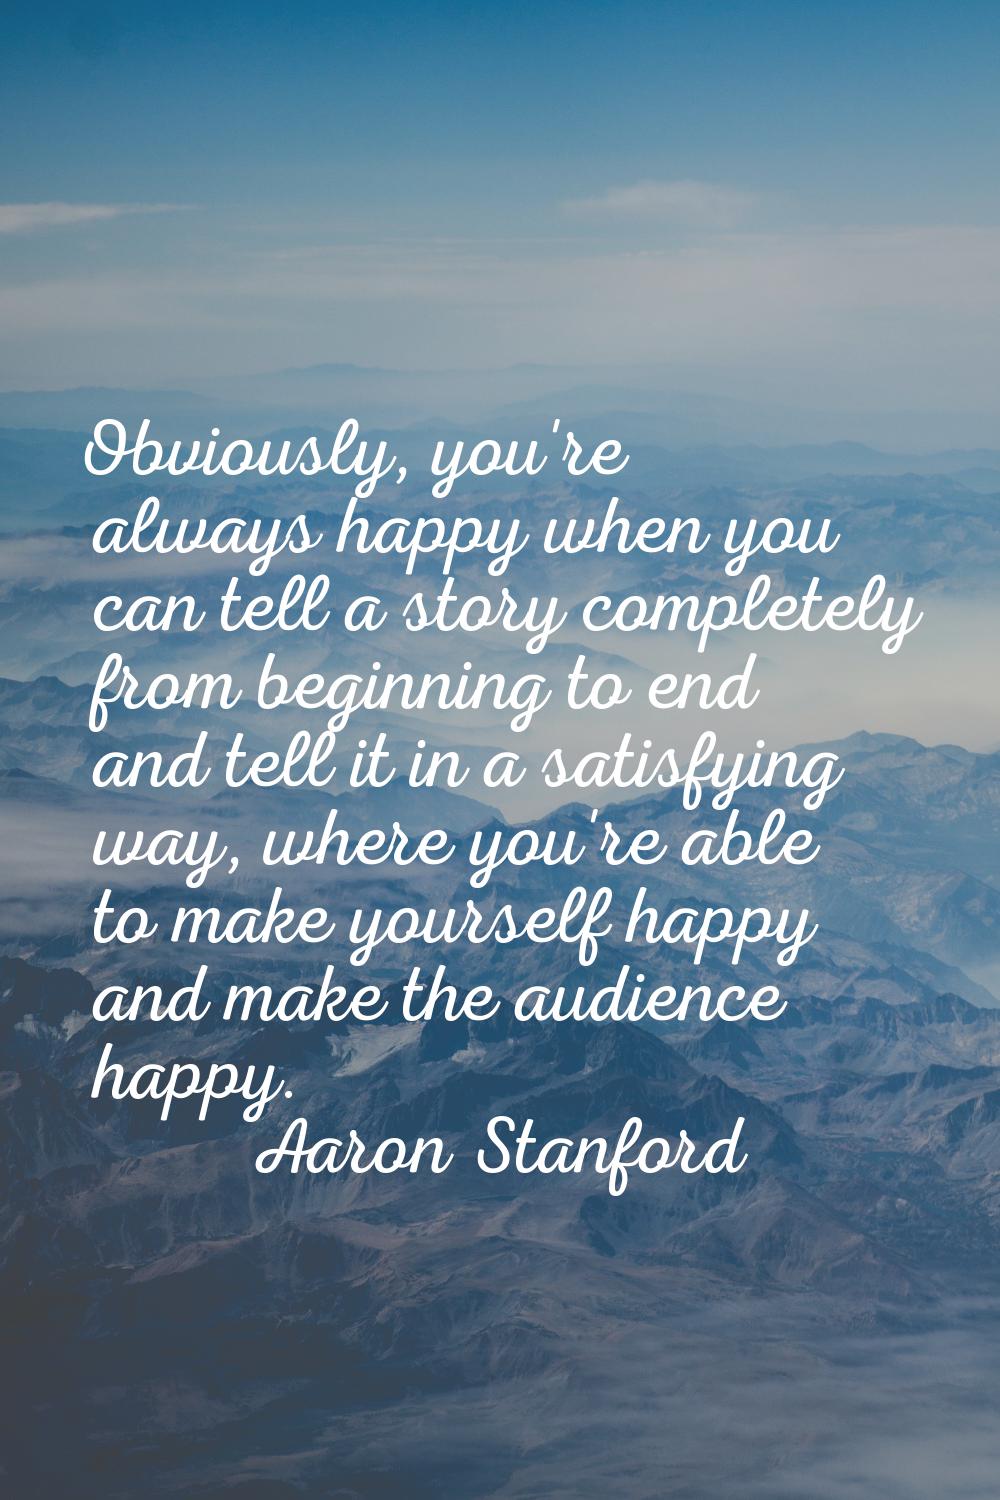 Obviously, you're always happy when you can tell a story completely from beginning to end and tell 